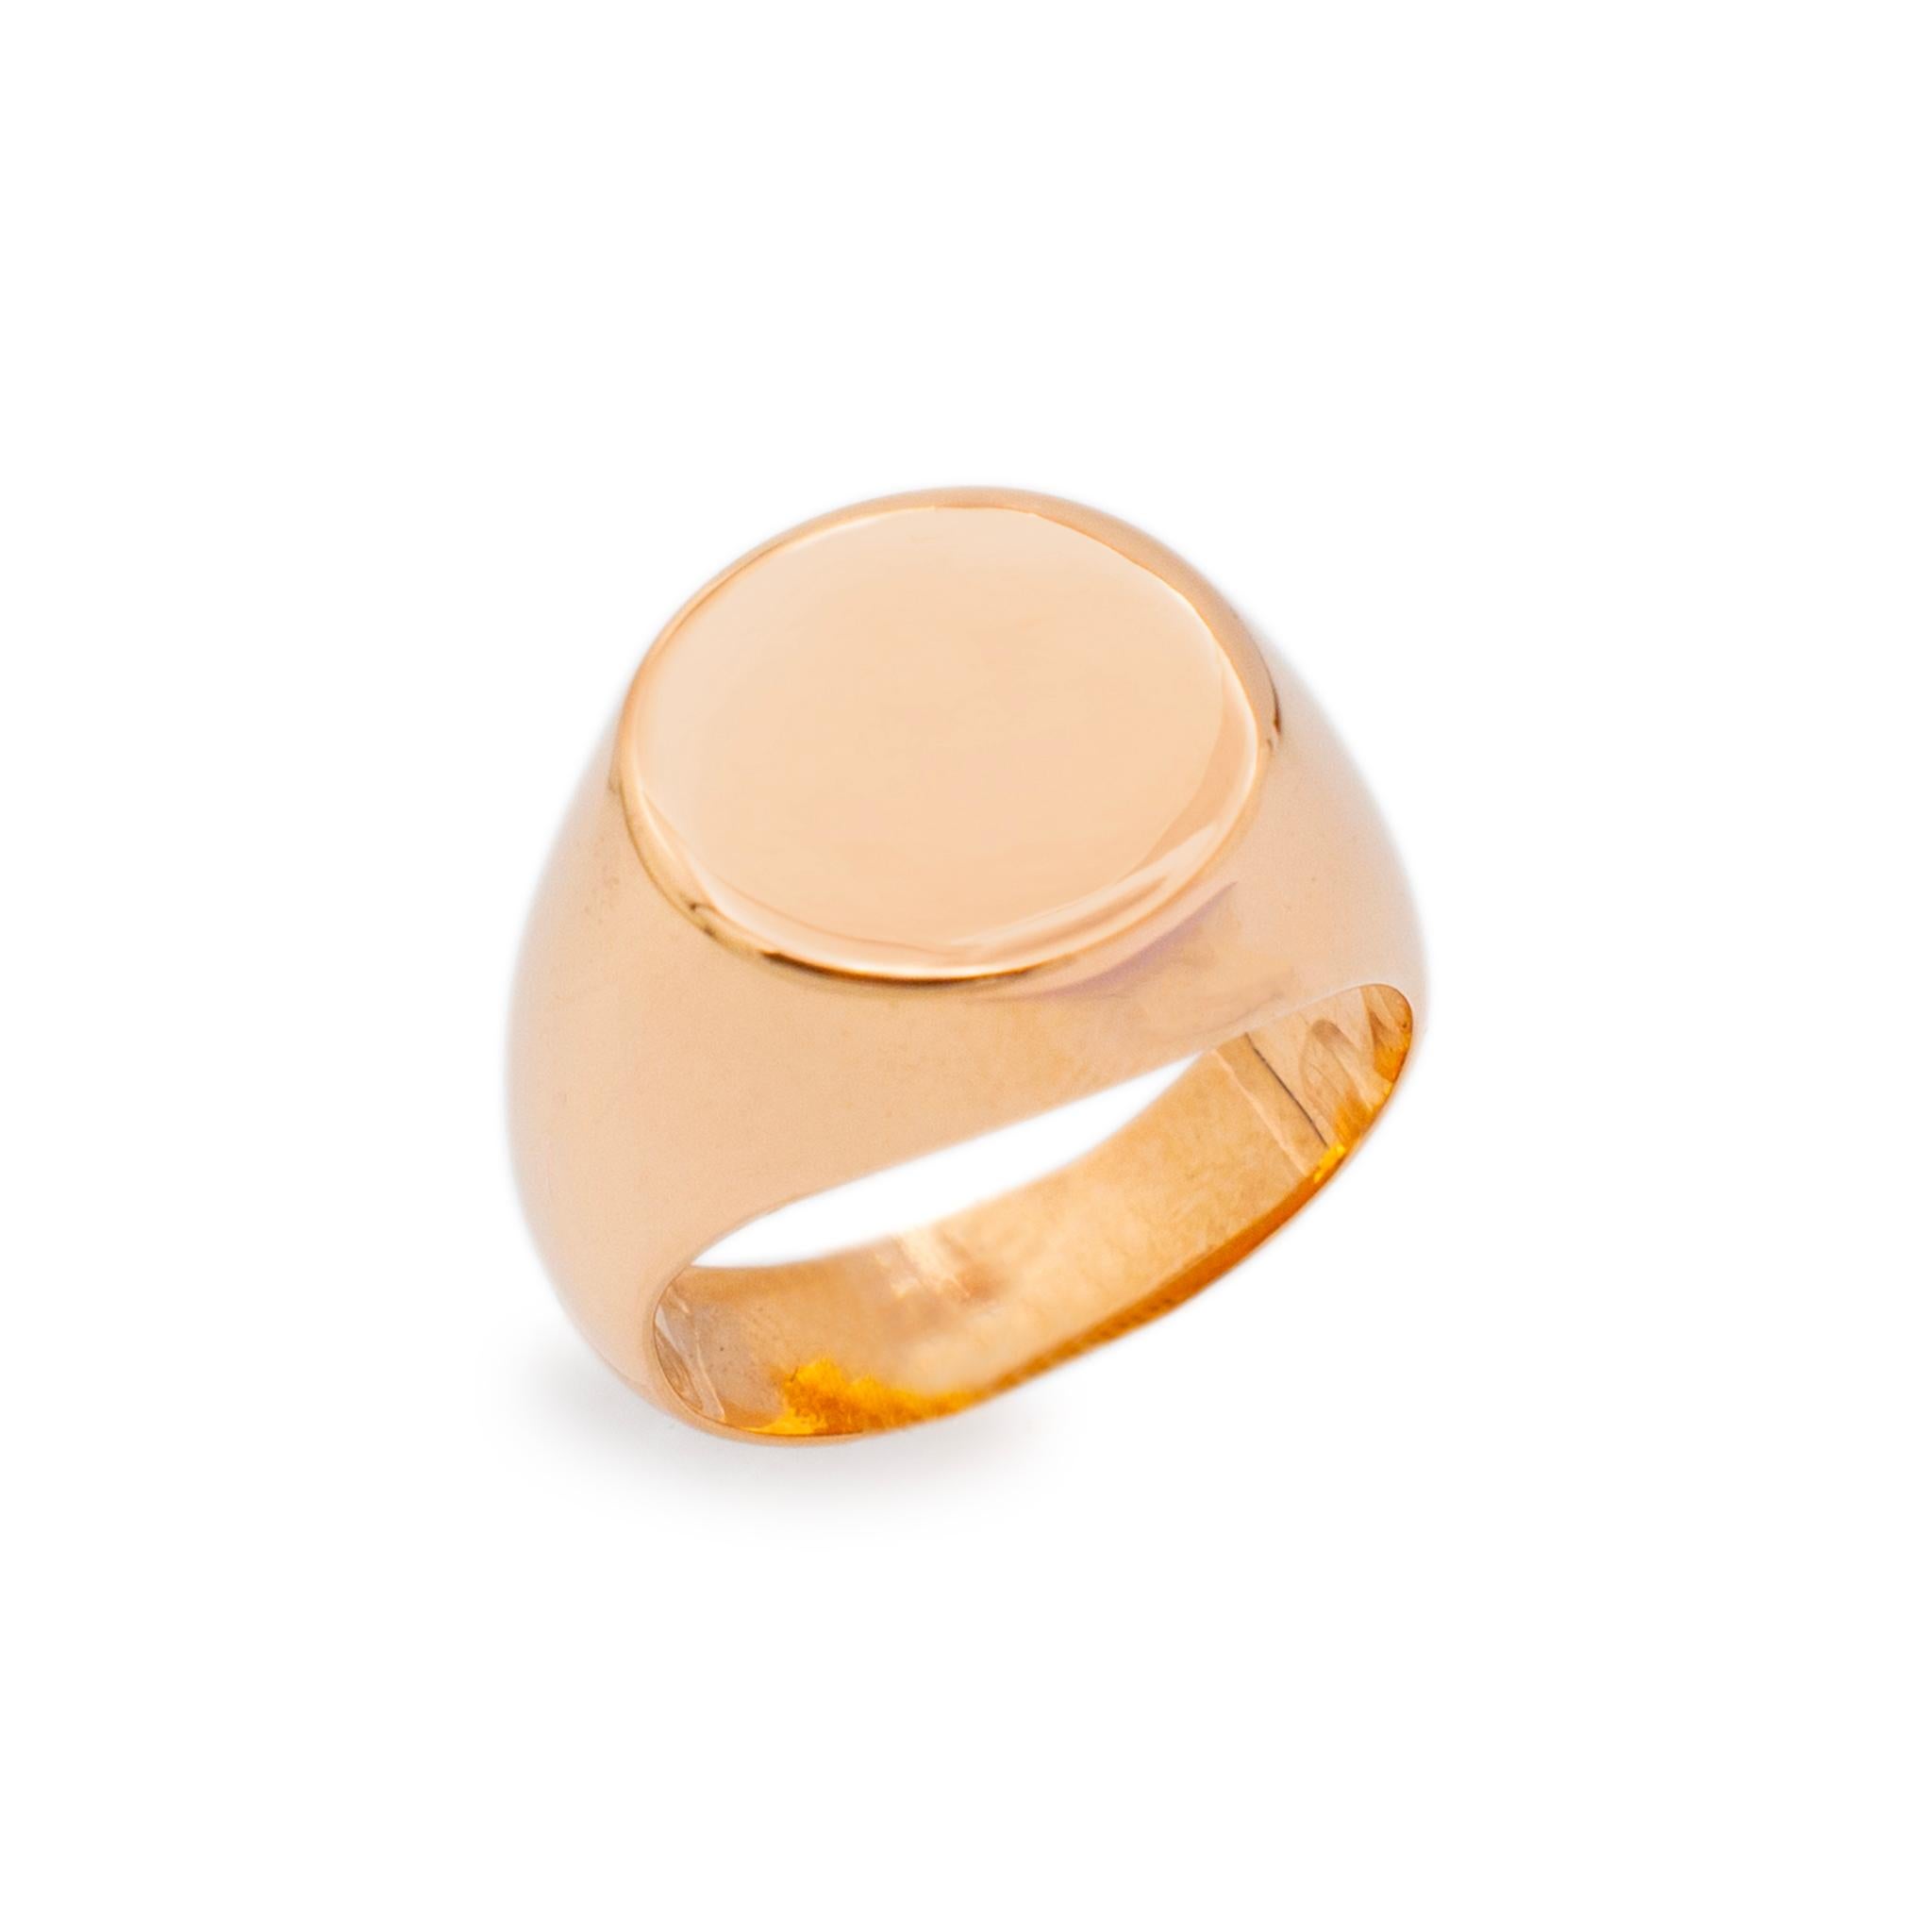 Gender: Ladies

Metal Type: 14K Rose Gold

Size: 6

Shank Maximum Width: 13.70 mm tapering to 4.65 mm

Weight: 15.68 grams

Ladies 14K rose gold signet ring with a tapered comfort-fit shank. The metal was tested and determined to be 14K rose